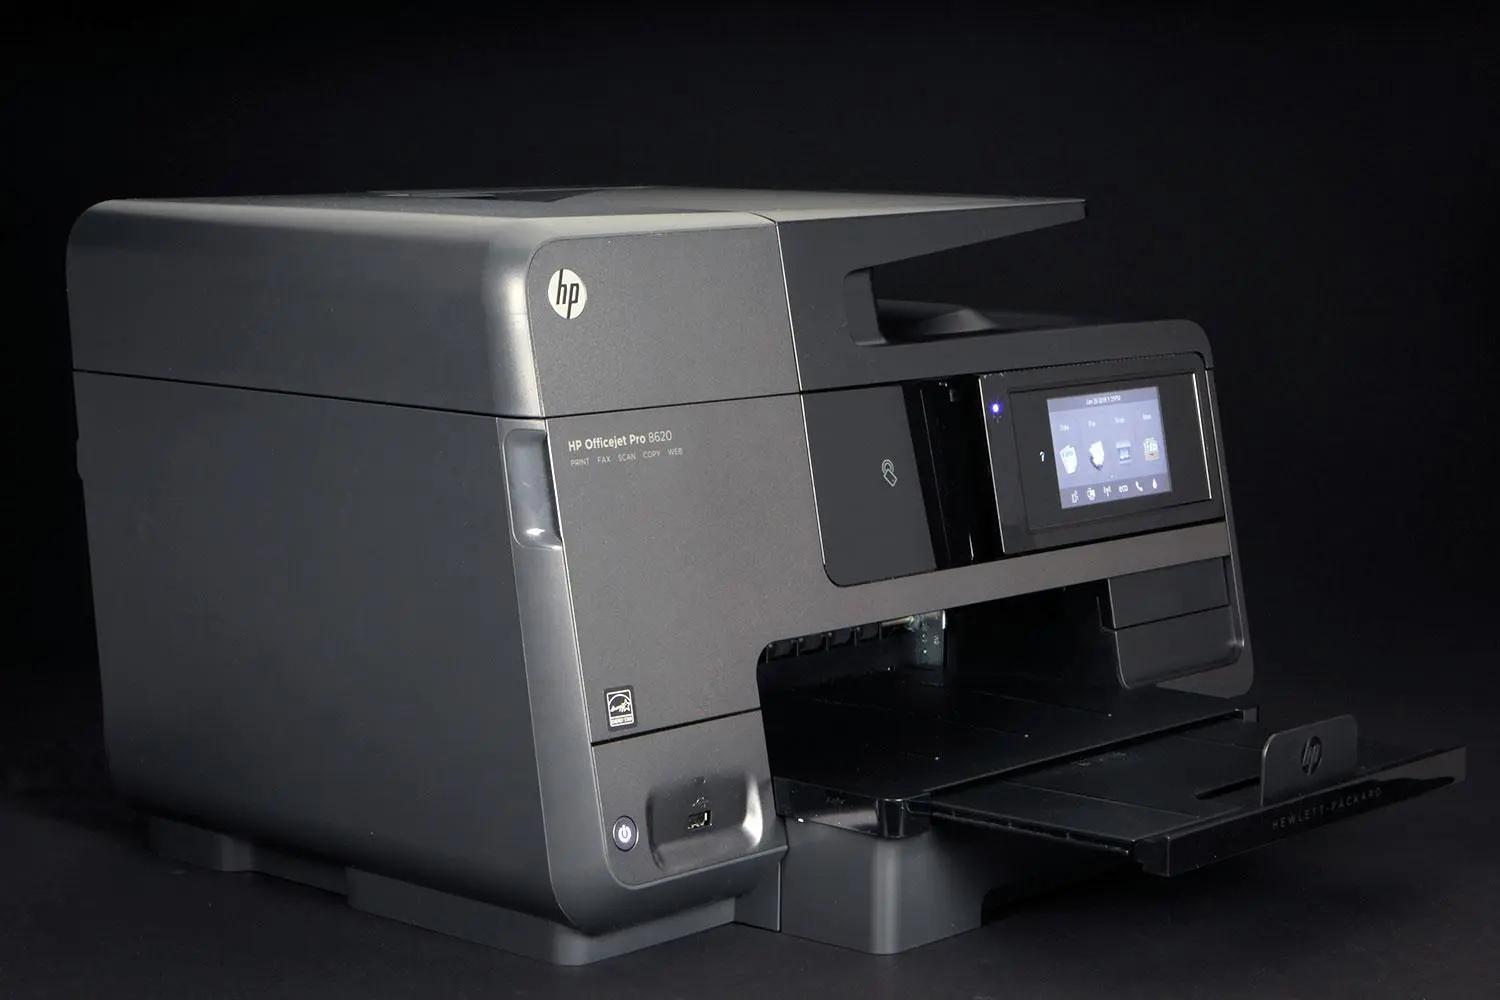 hewlett-packard other hardware printer null print hp officejet pro 8620 - Why isn't my printer printing when it has ink